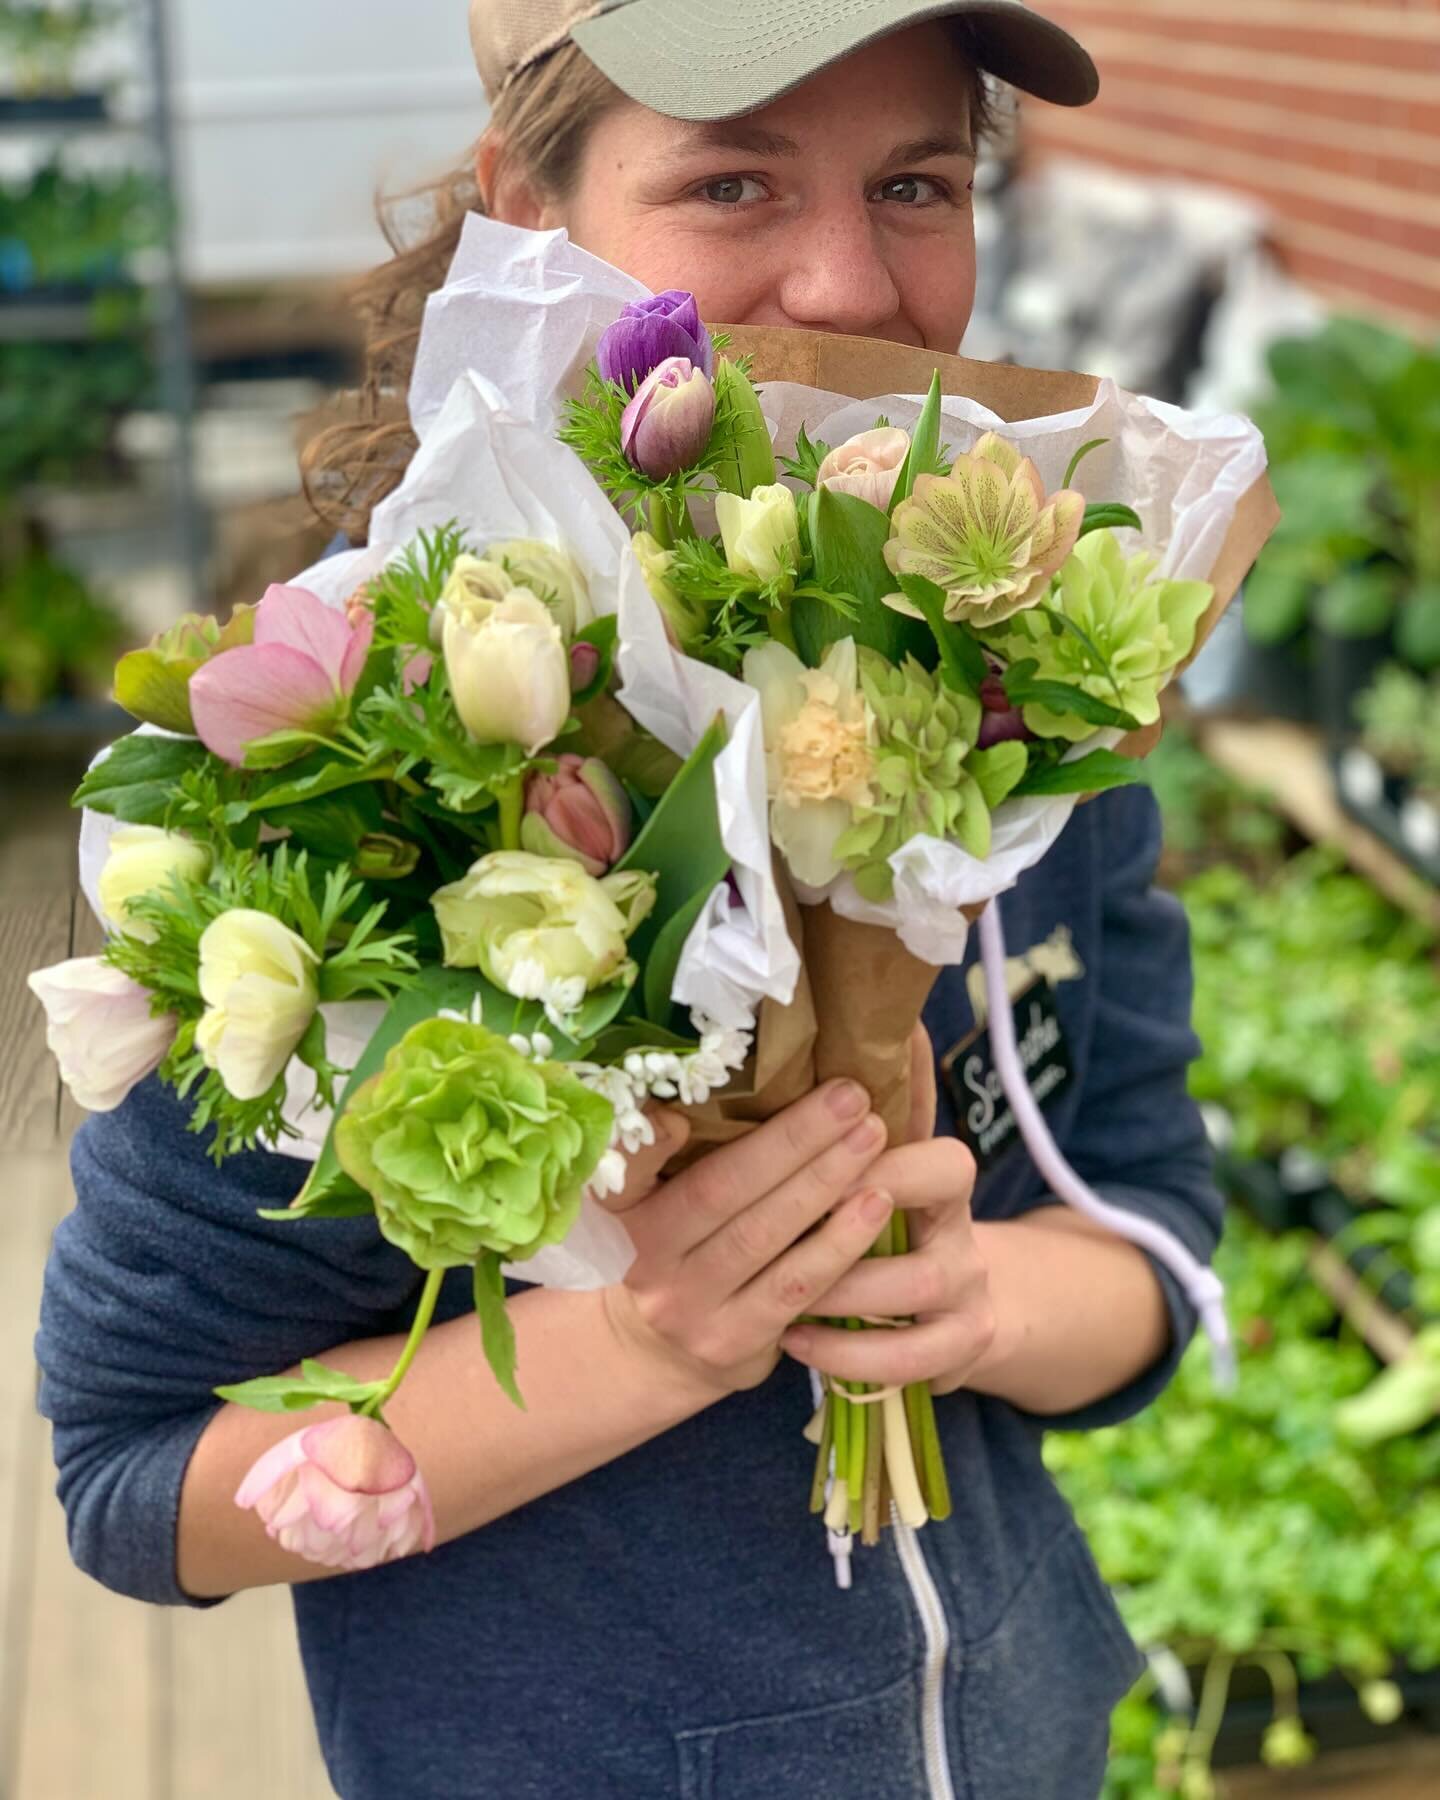 Peep the hellebores in these beautiful bouquets from @wetknotfarms . Perfect for your Easter table!